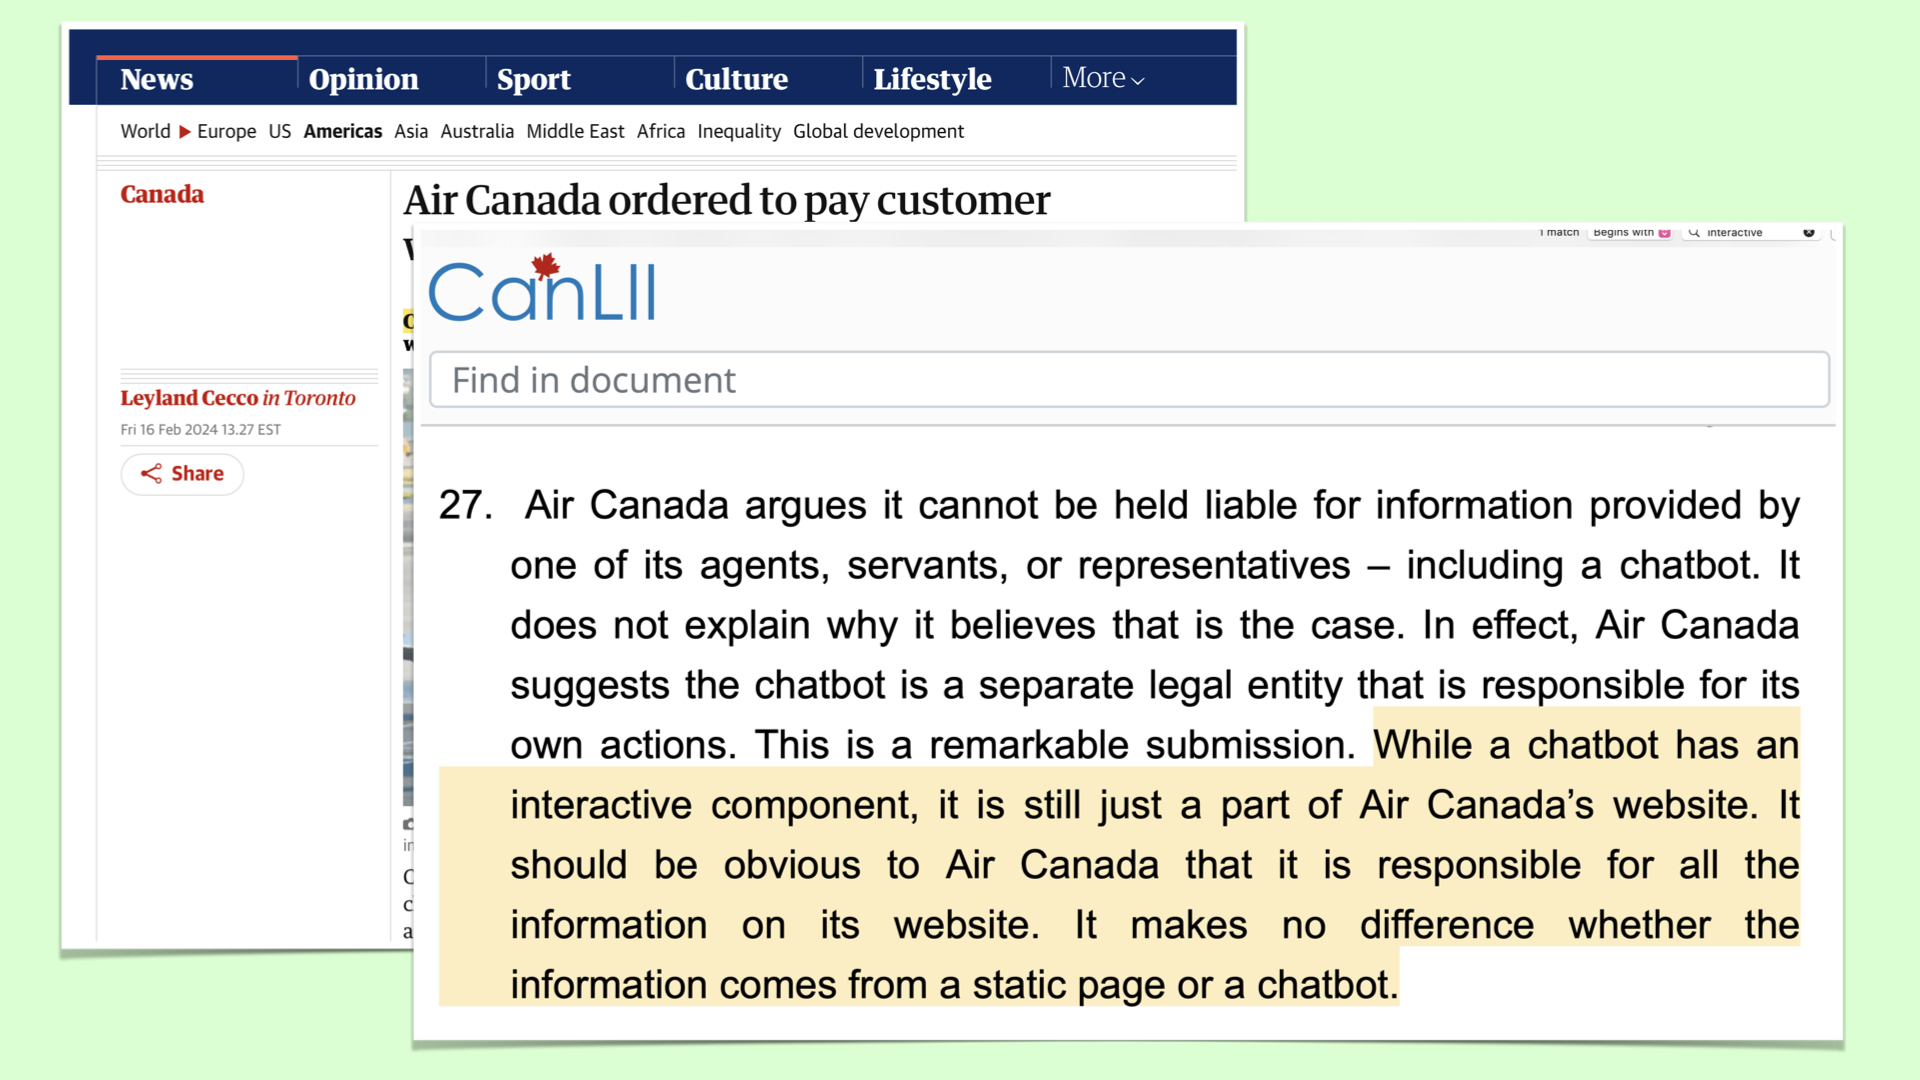 Excerpt of court finding: While a chatbot has an interactive component, it is still just a part of Air Canada's website. It should be obvious to Air Canada that it is responsible for all the information on its website. It makes no difference whether the information comes from a static page or a chatbot.